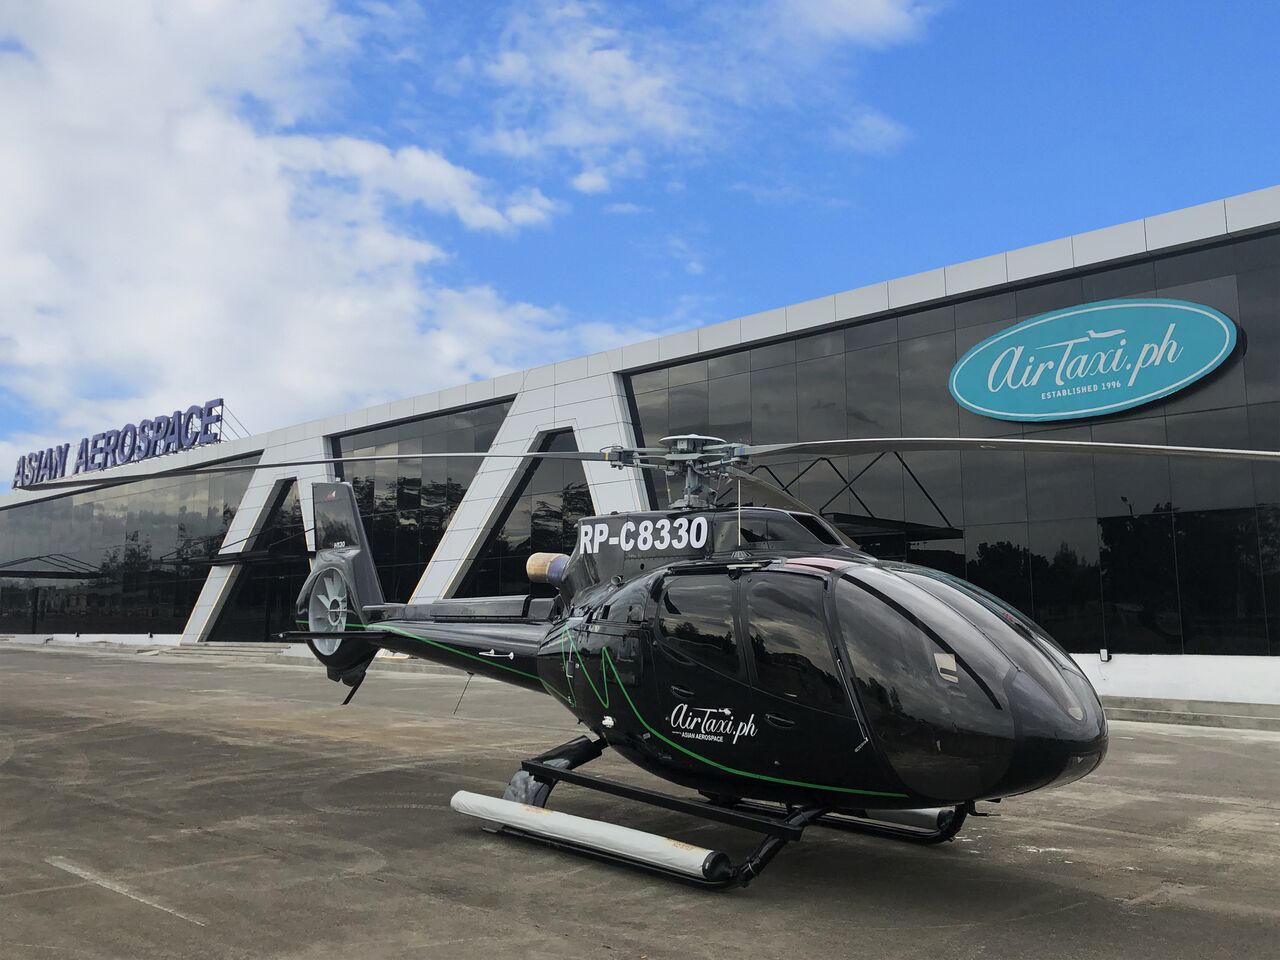 AirTaxi.ph adds new H130 to fleet